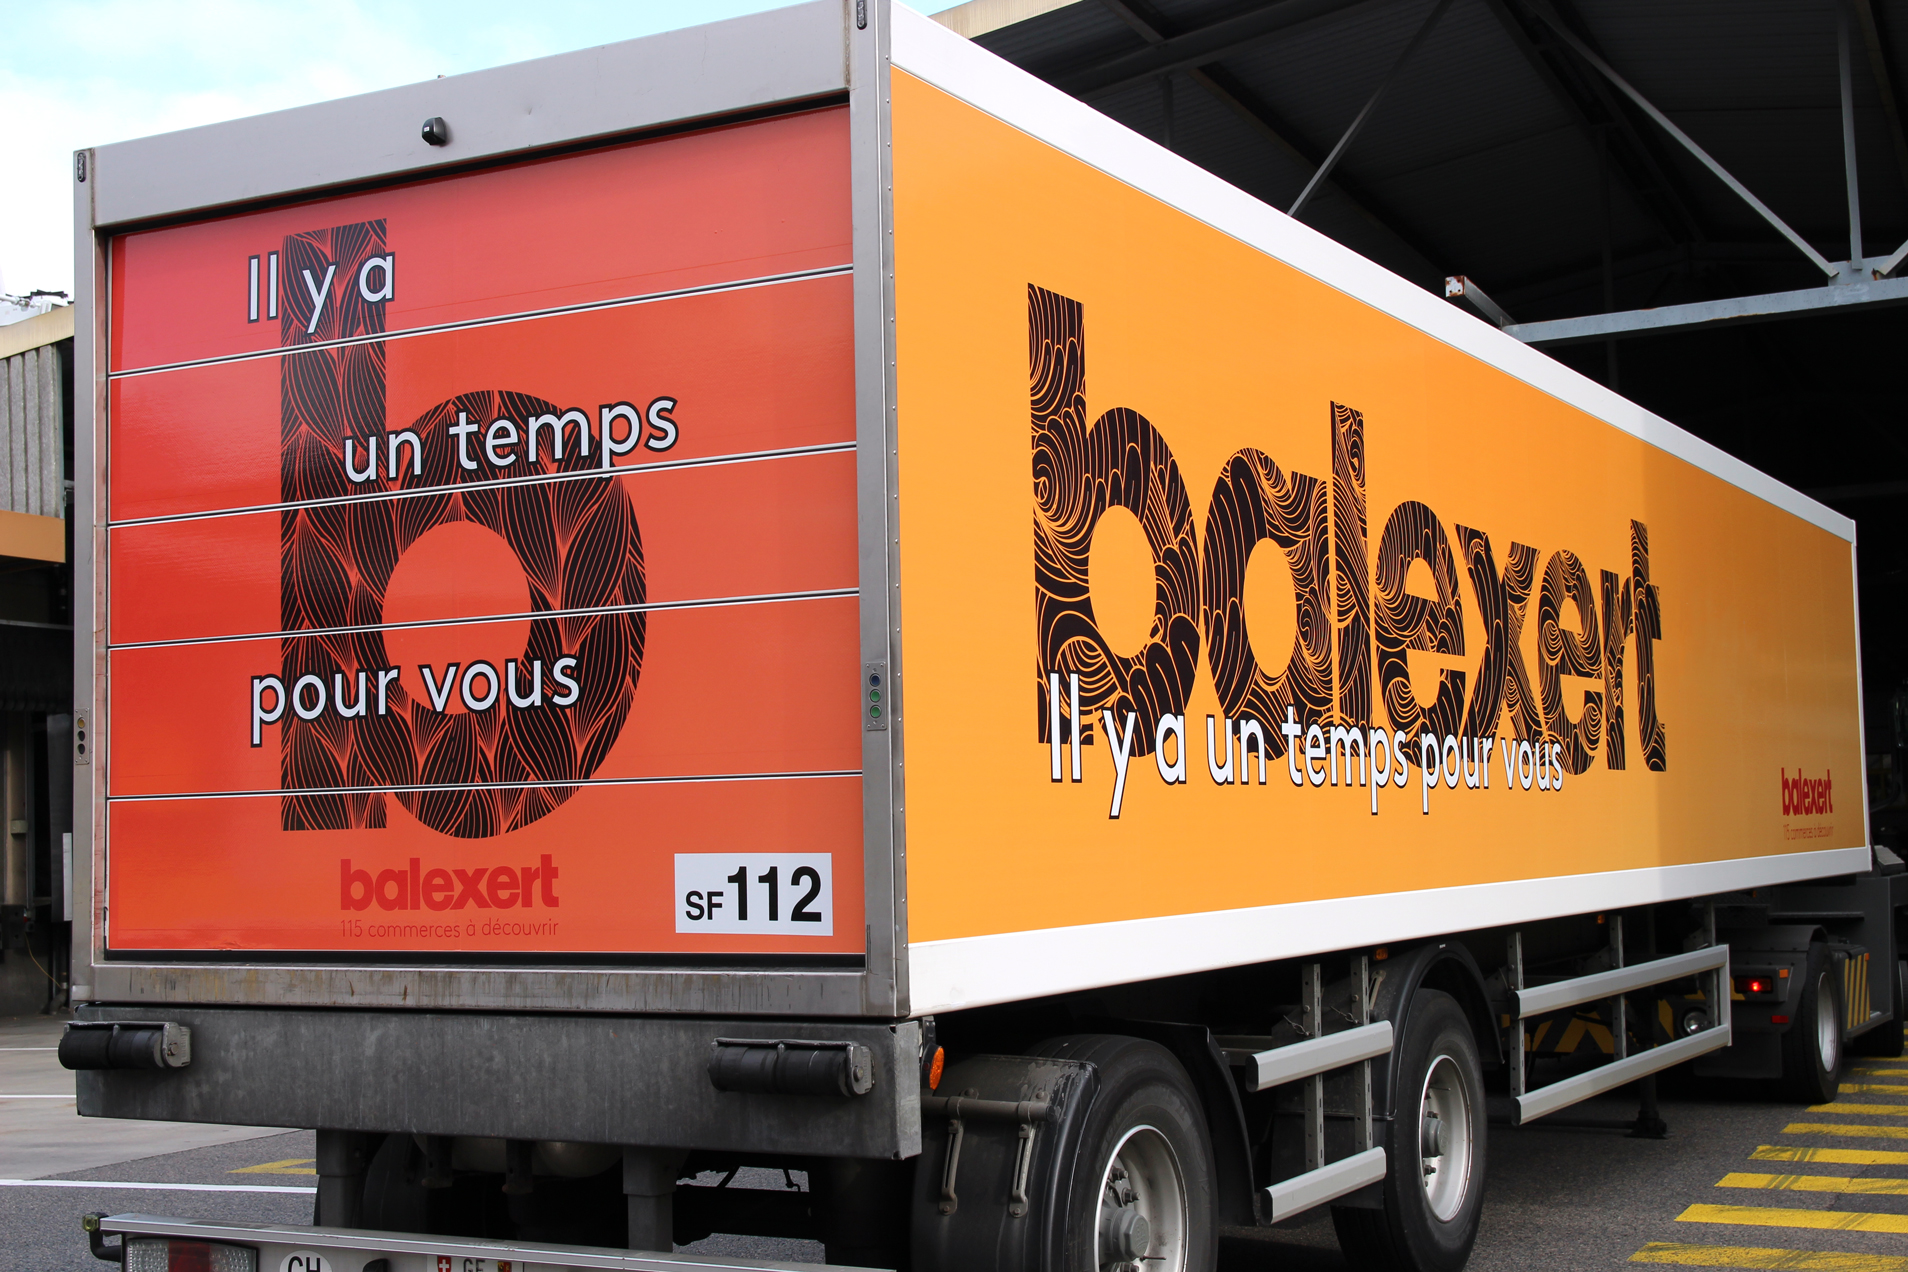 Display of the corporate design on a truck